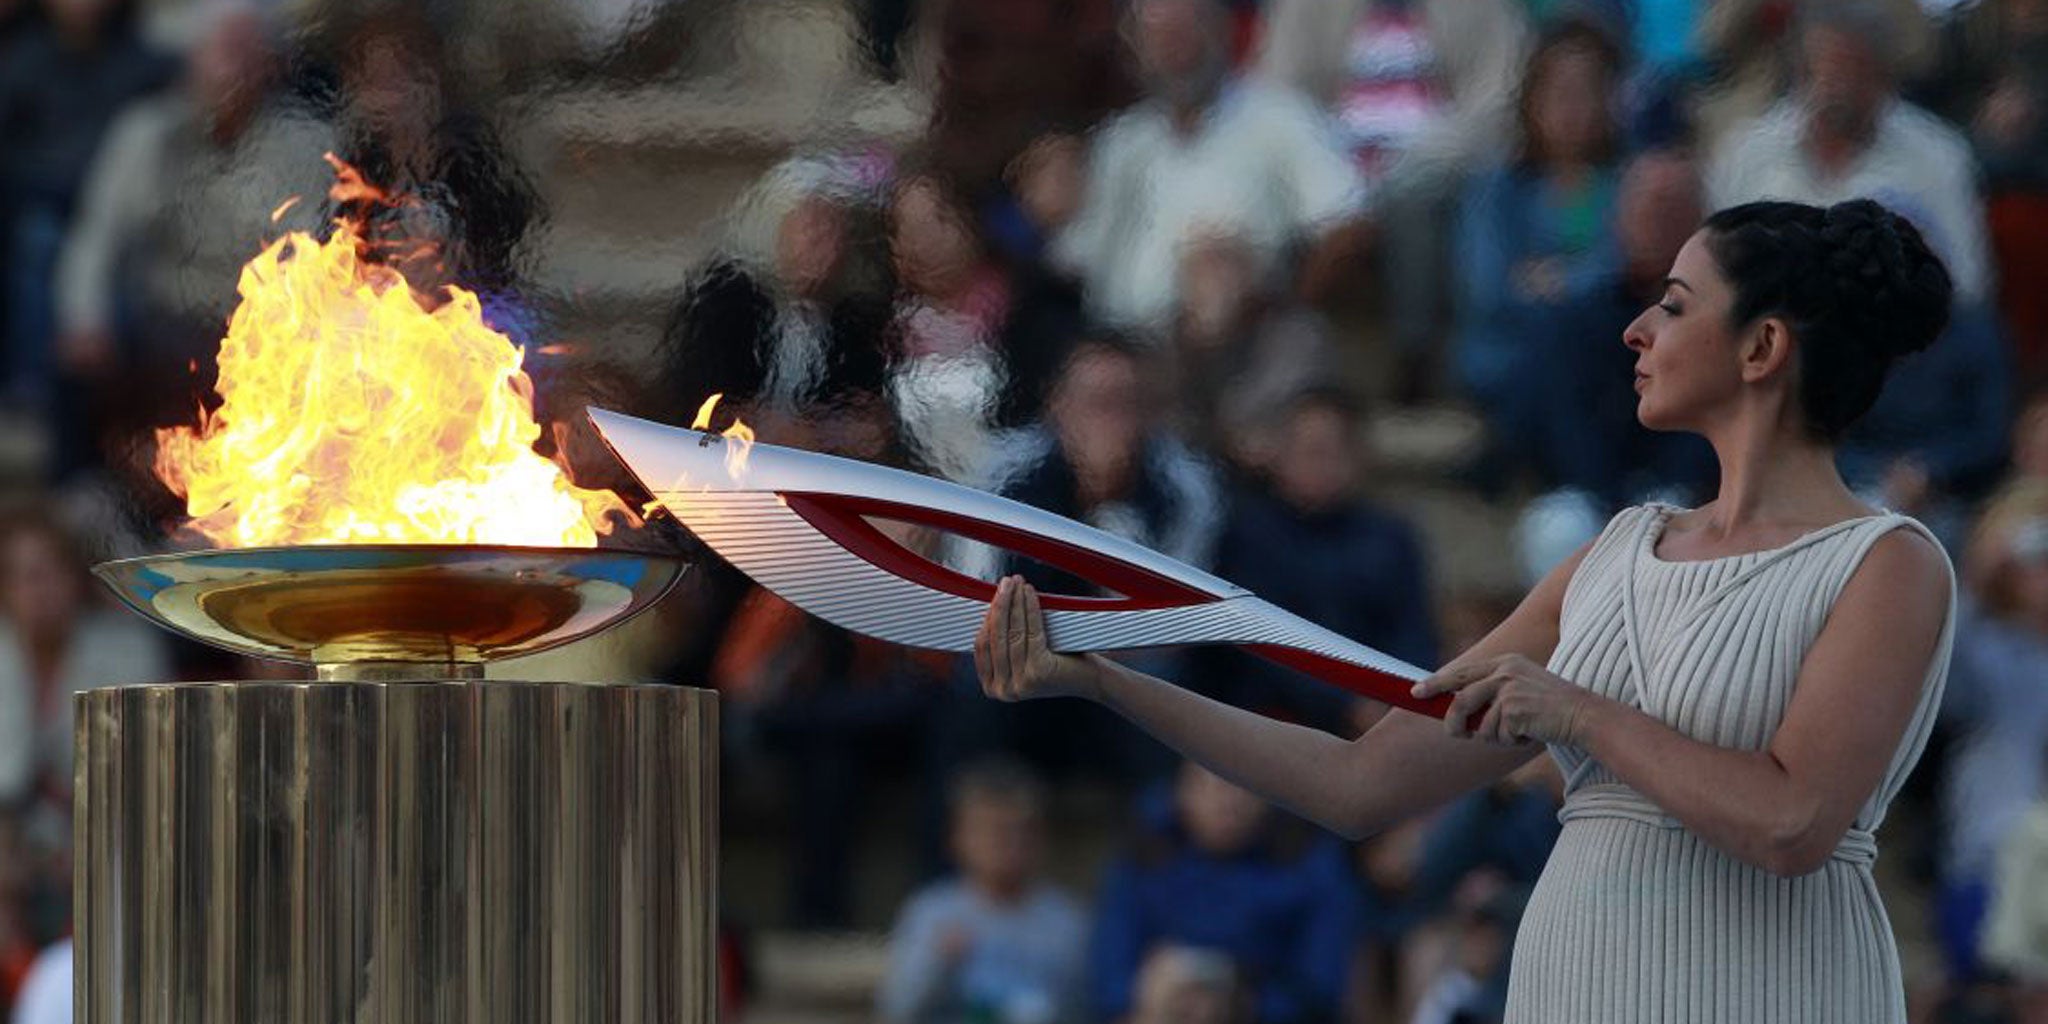 The Olympic flame is lit in Athens before its transfer to the Sochi Games